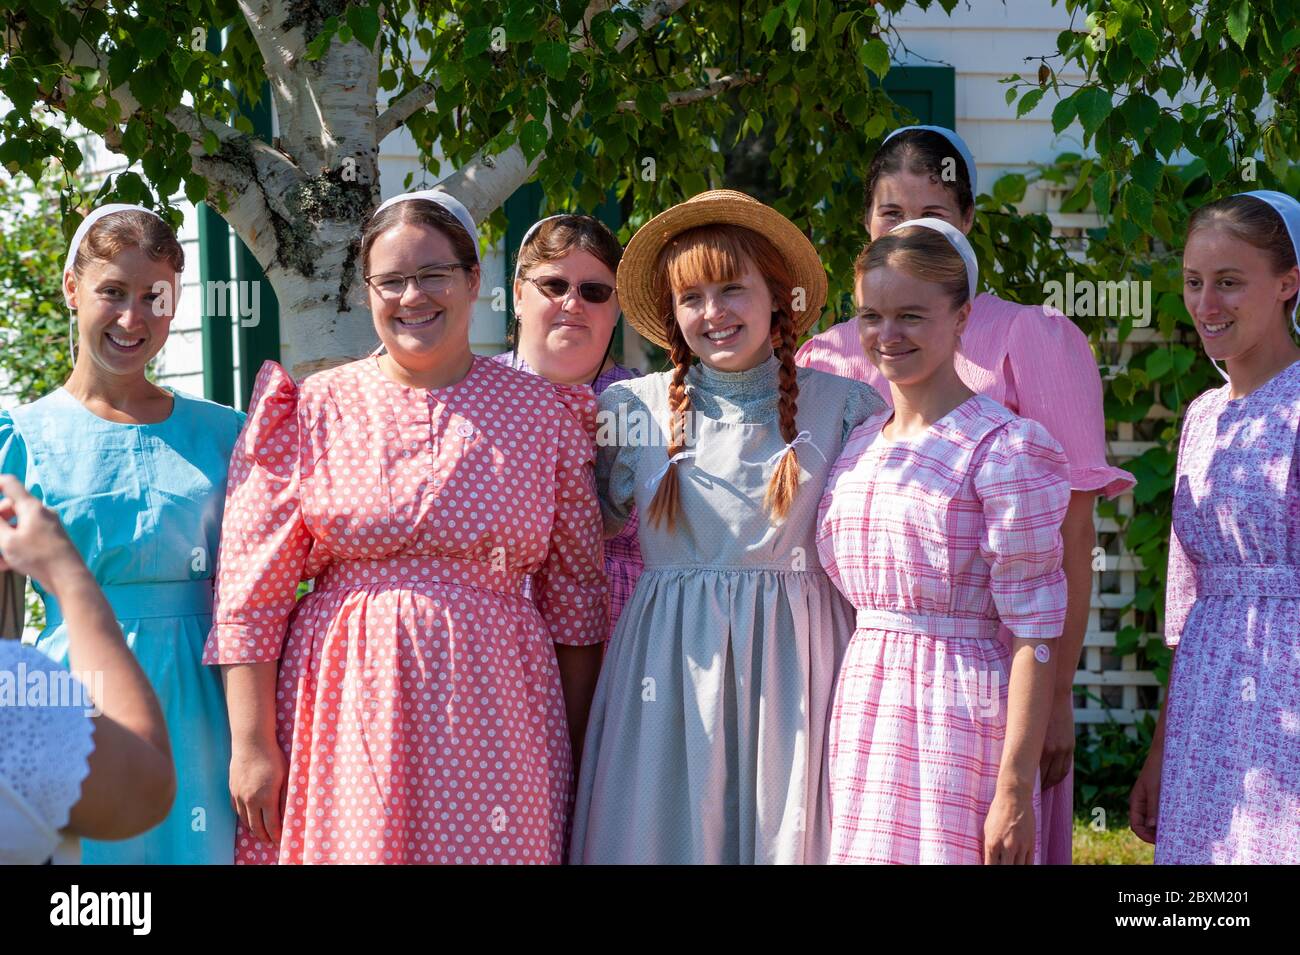 Group of Amish girls visiting Green Gables, posing for a snapshot with an actress in the fictional character of Anne Shirley. Cavendish, PEI, Canada. Stock Photo